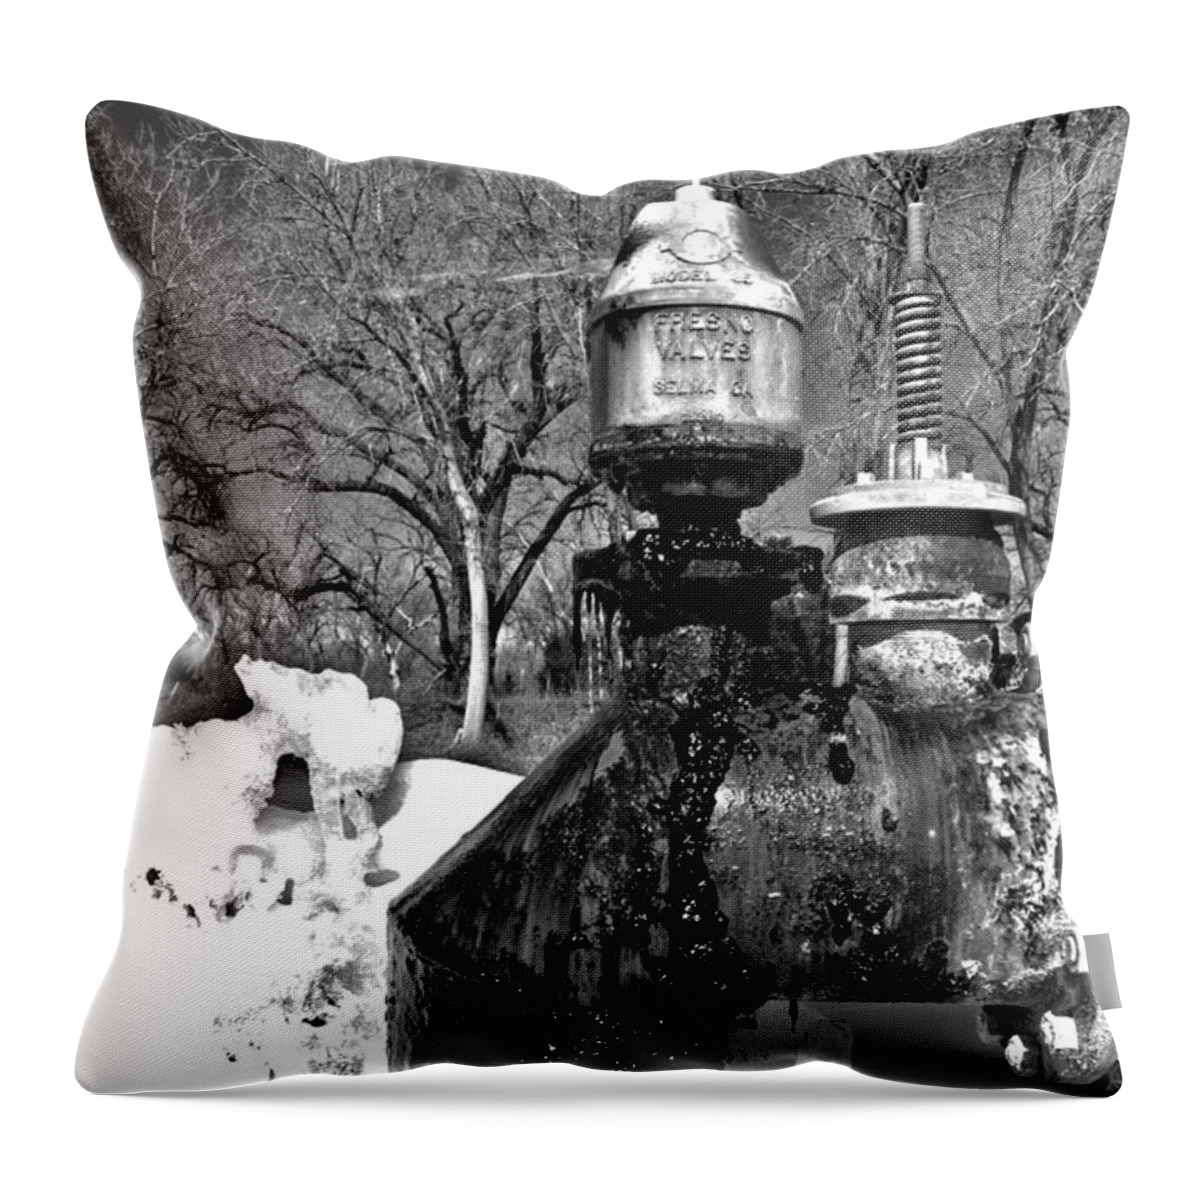 Sludge Throw Pillow featuring the photograph Sludge by Shane Bechler